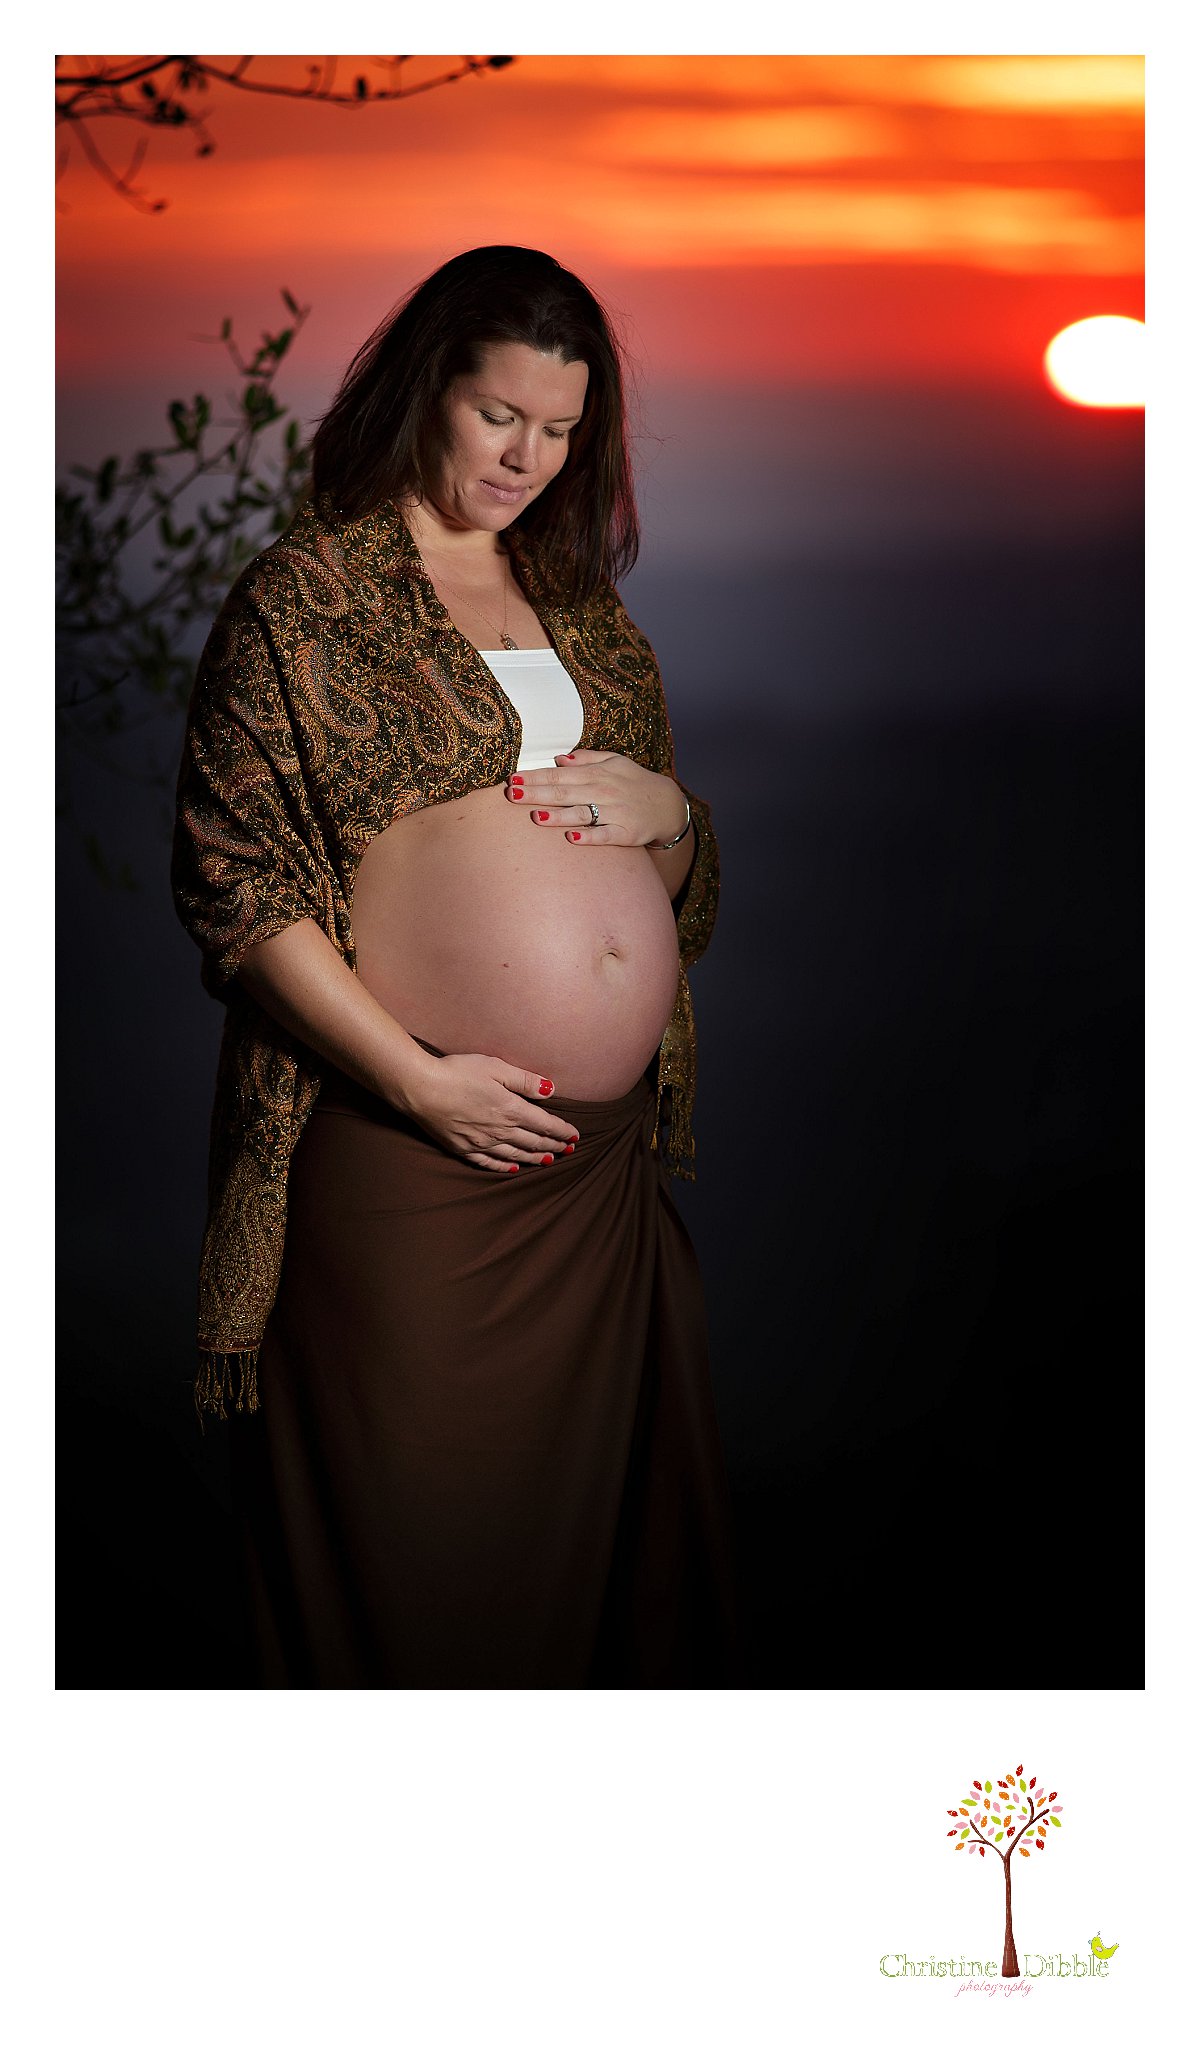 Maternity Photo Shoot, #maternity #prego #photography #pregnant #pregnancy  #baby #infant #pic…